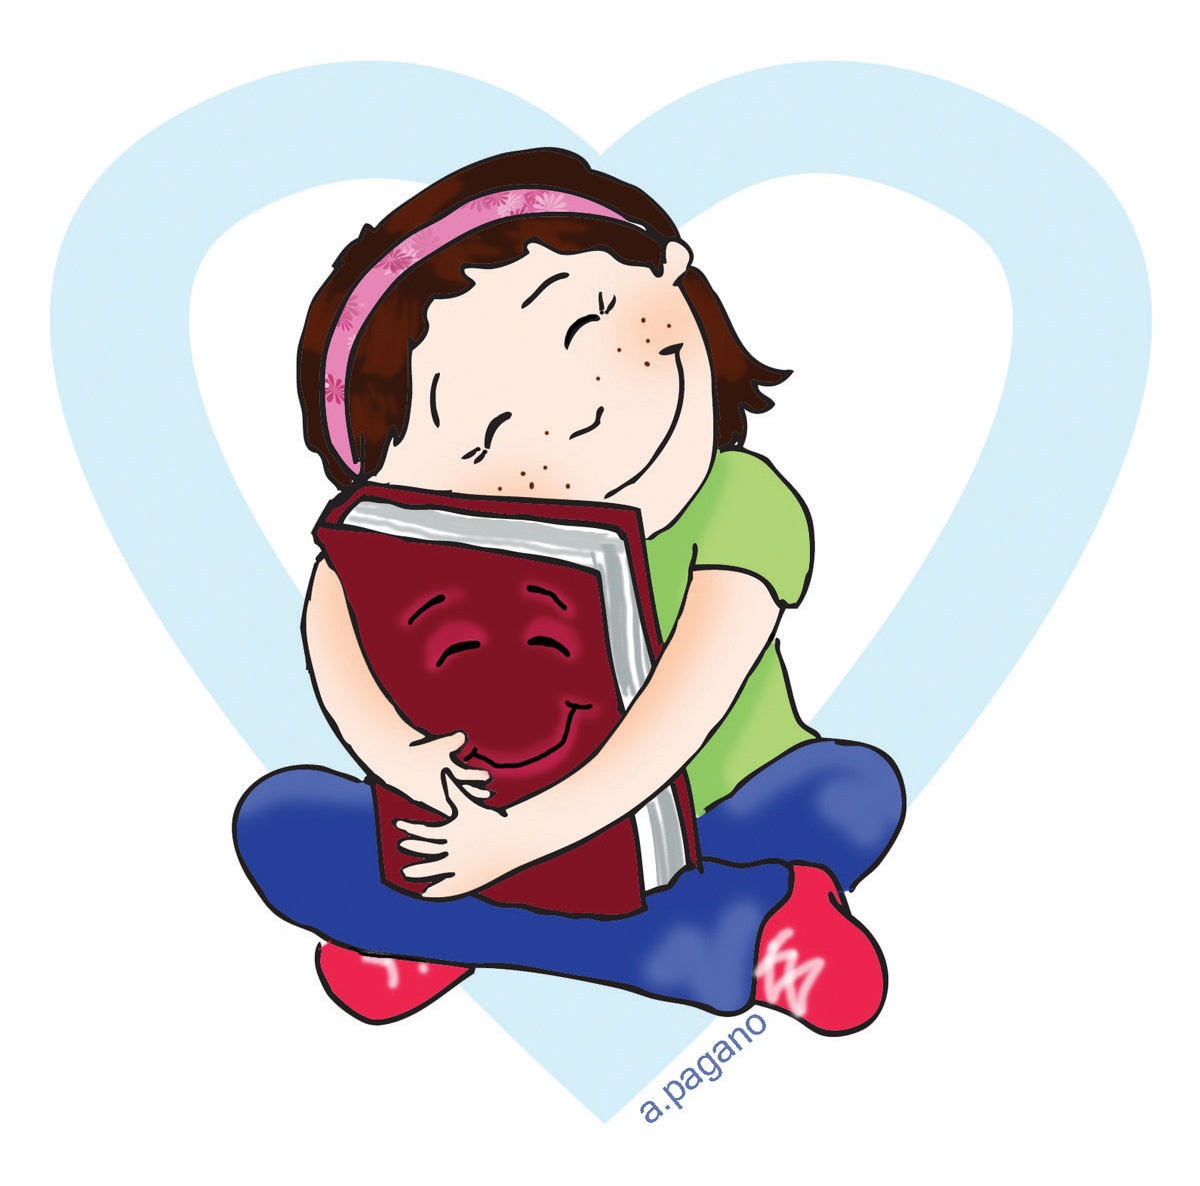 Student Reading Clipart   Clipart Panda   Free Clipart Images